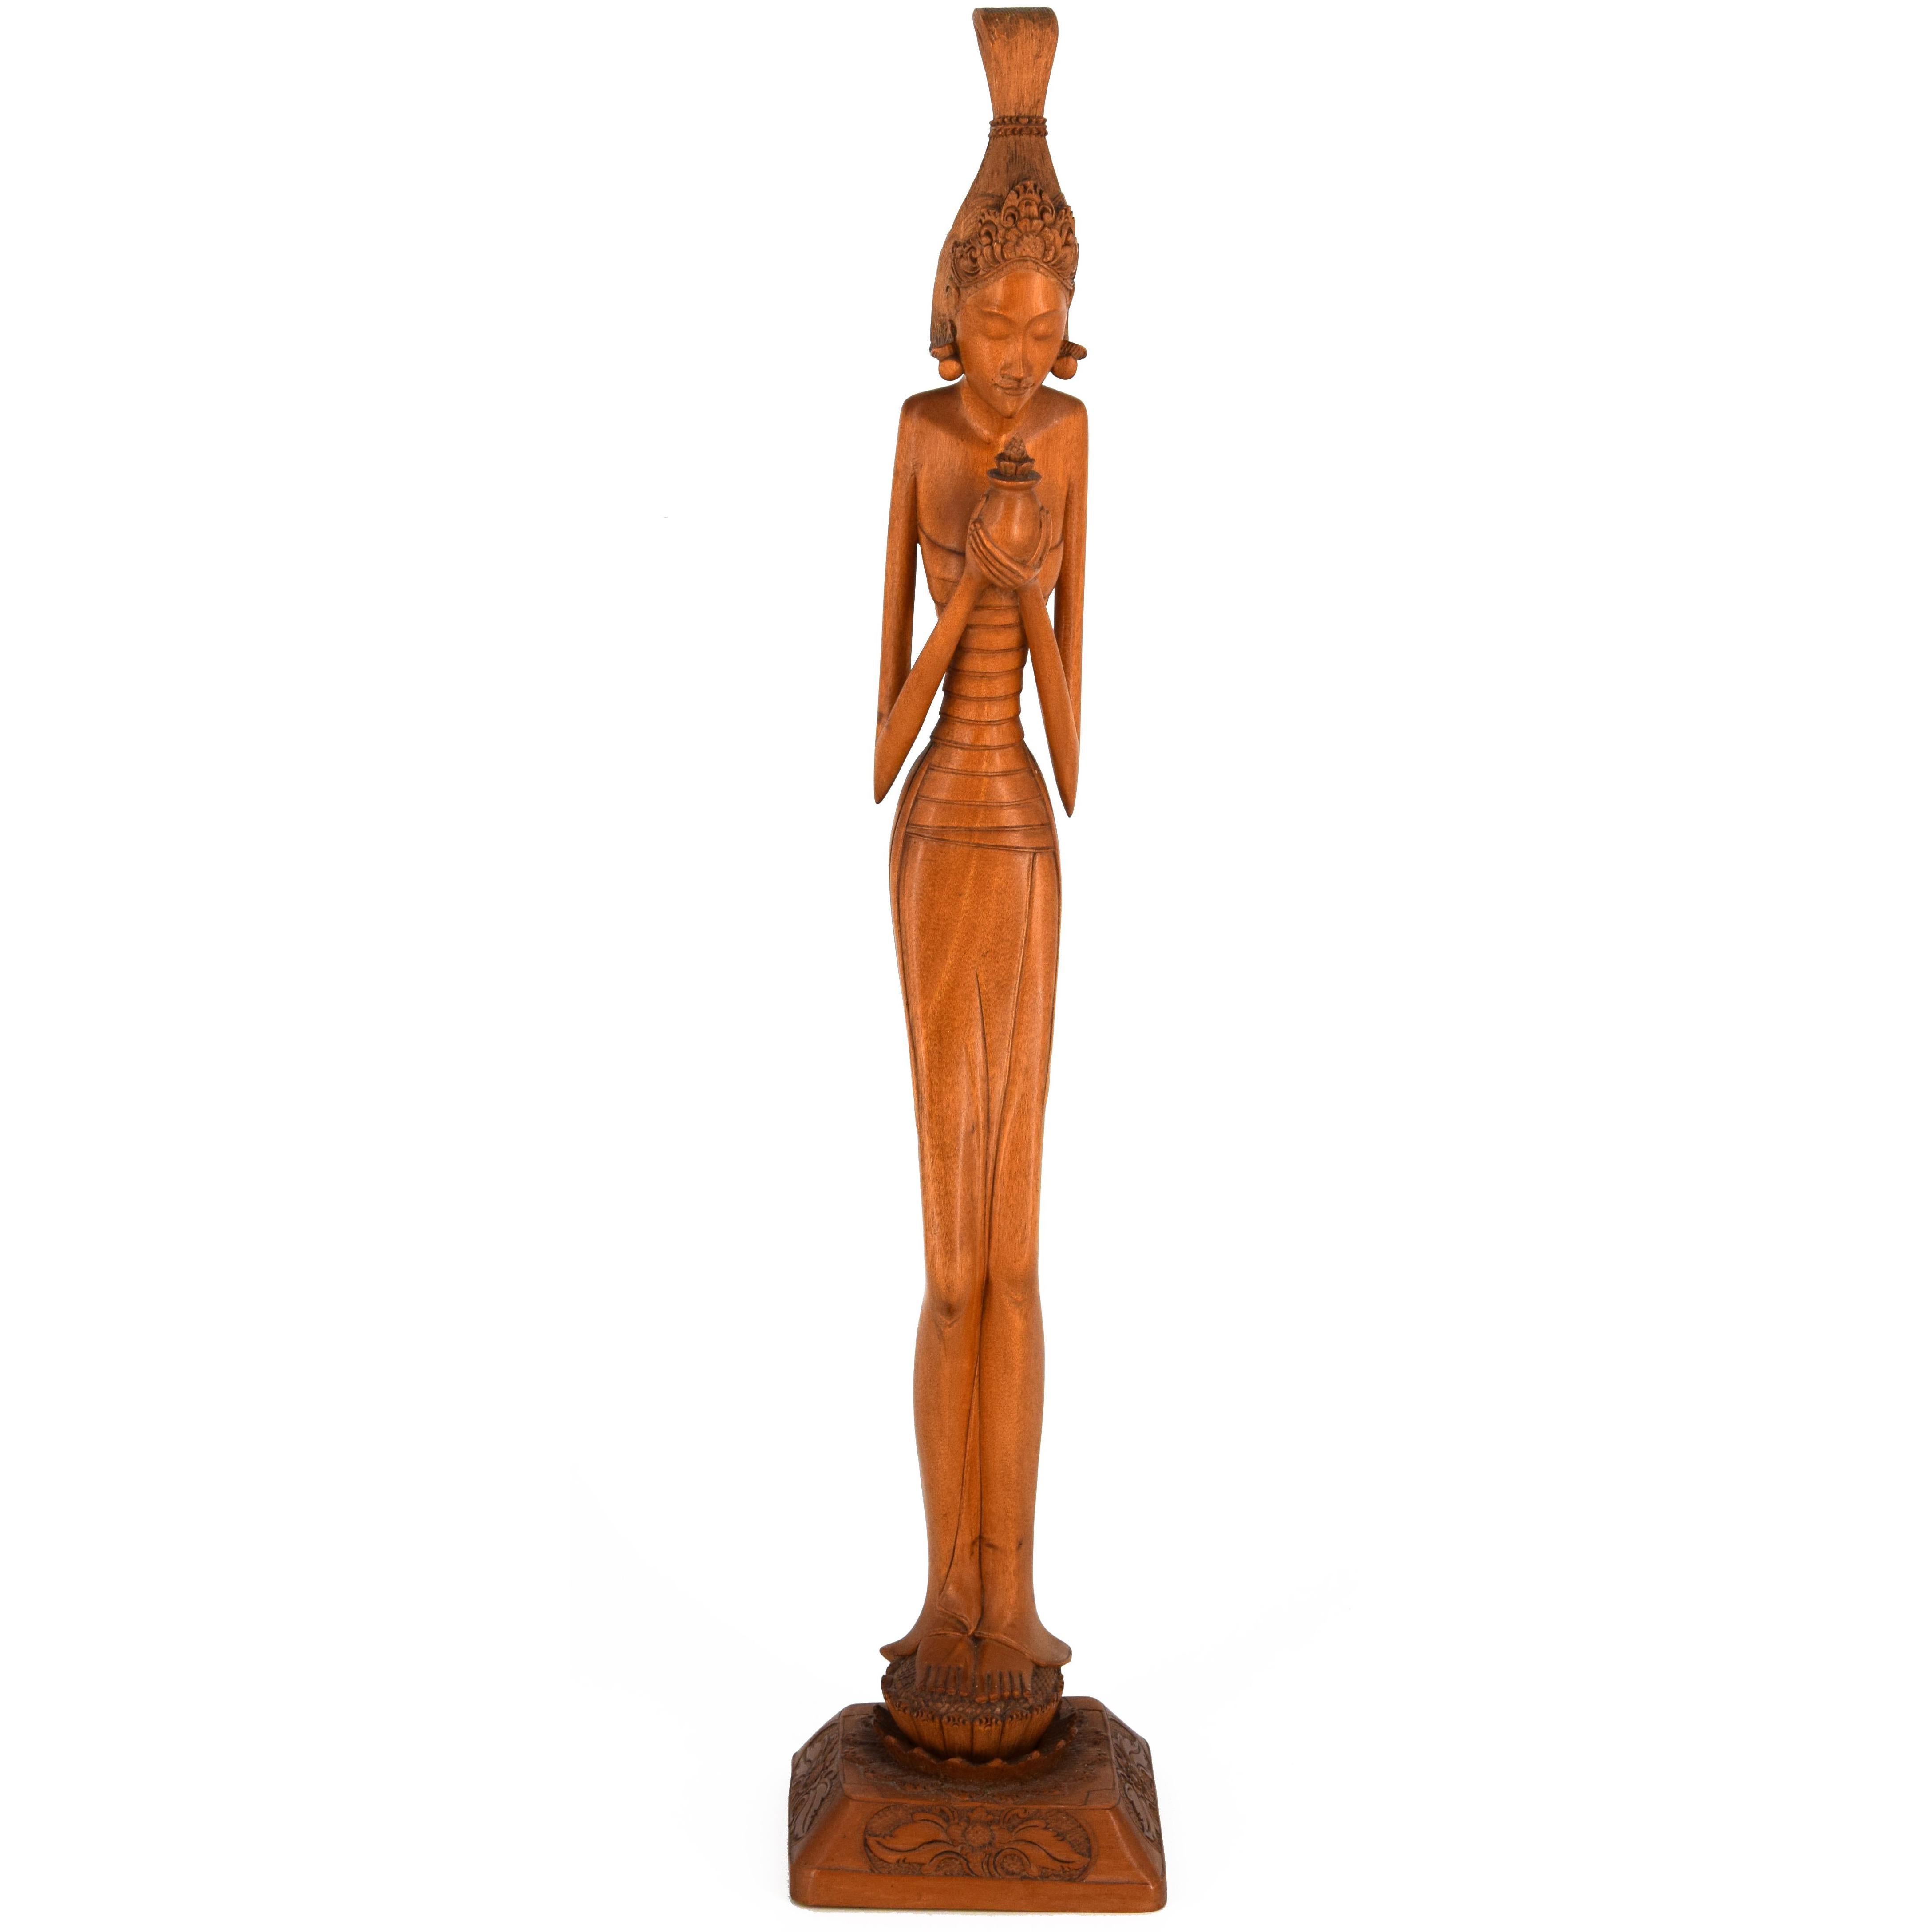 Wooden Sculpture of Woman from Bali